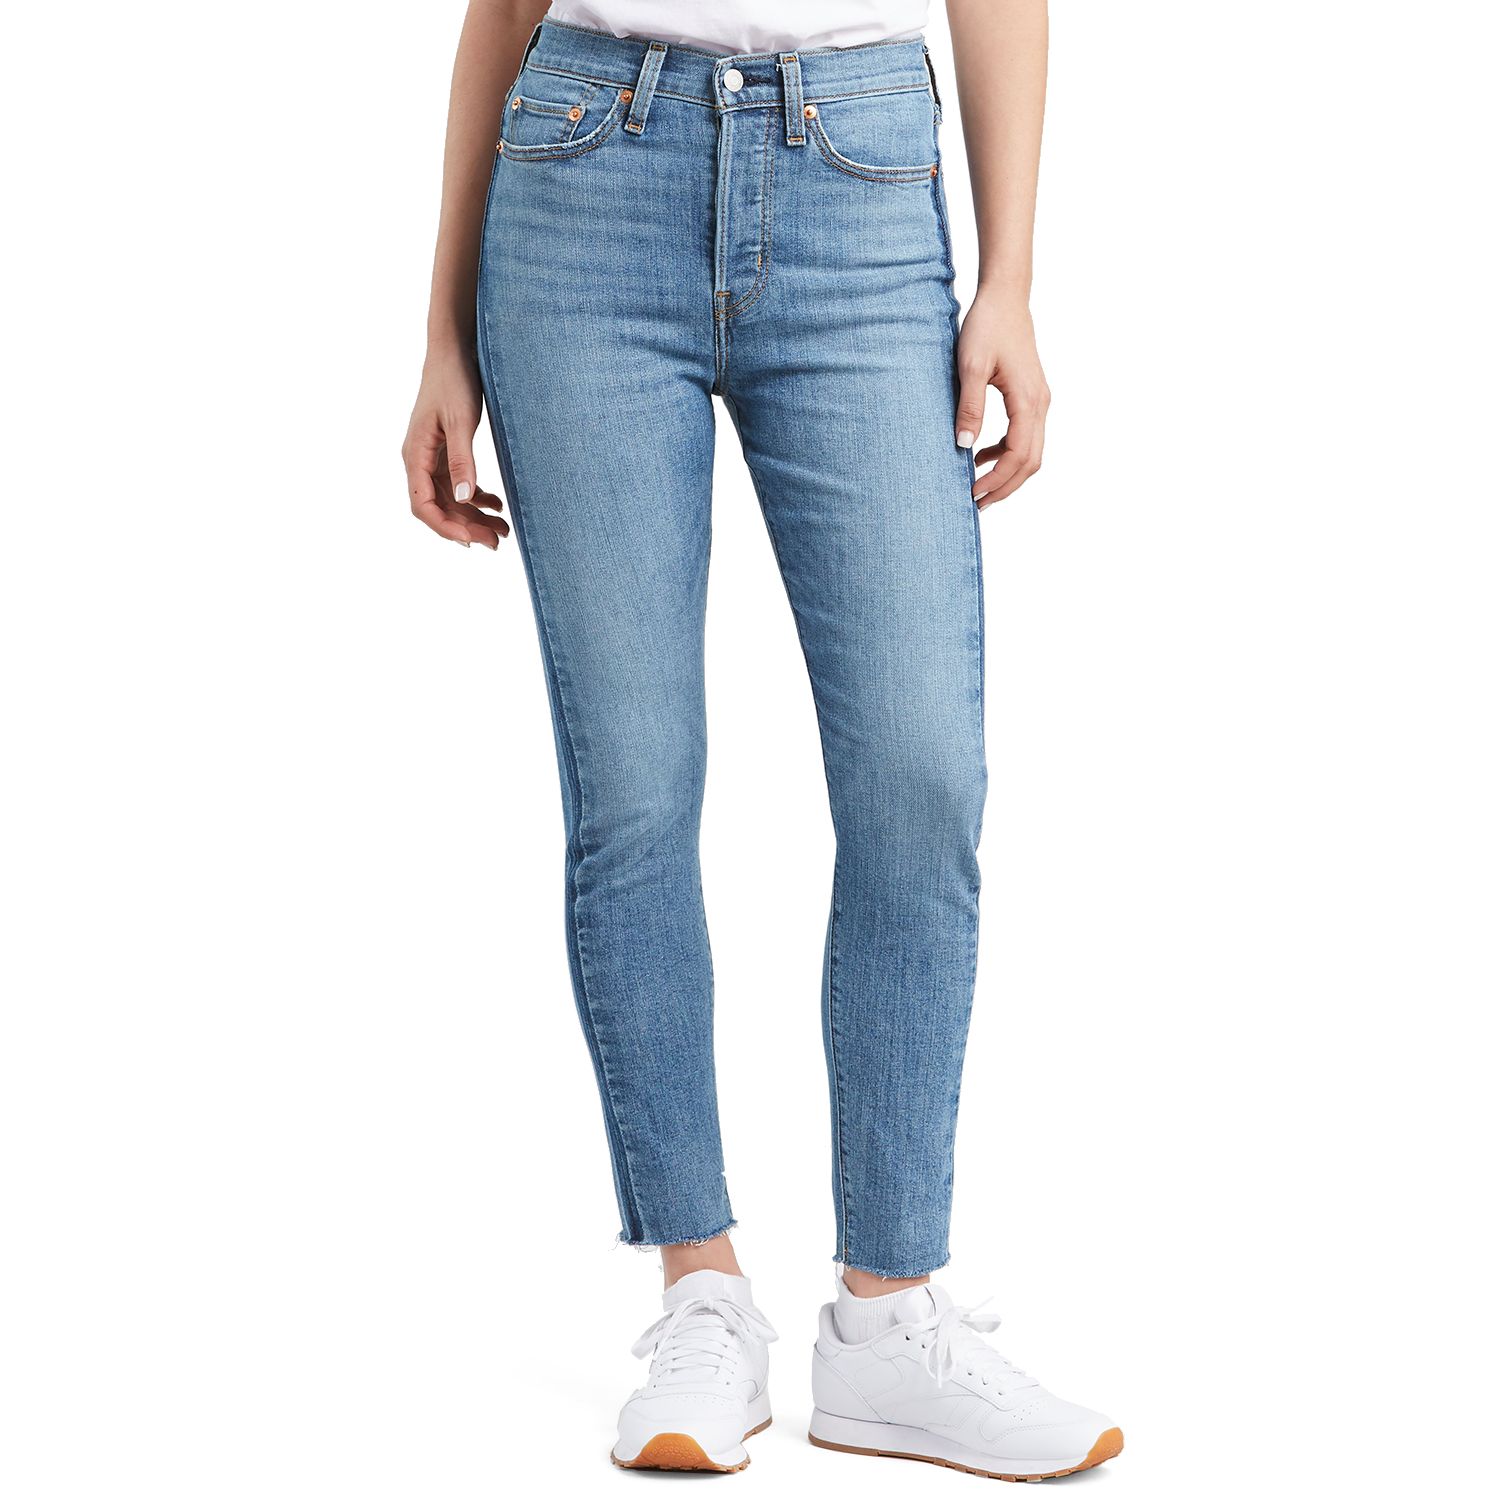 levi's wedgie fit skinny jeans